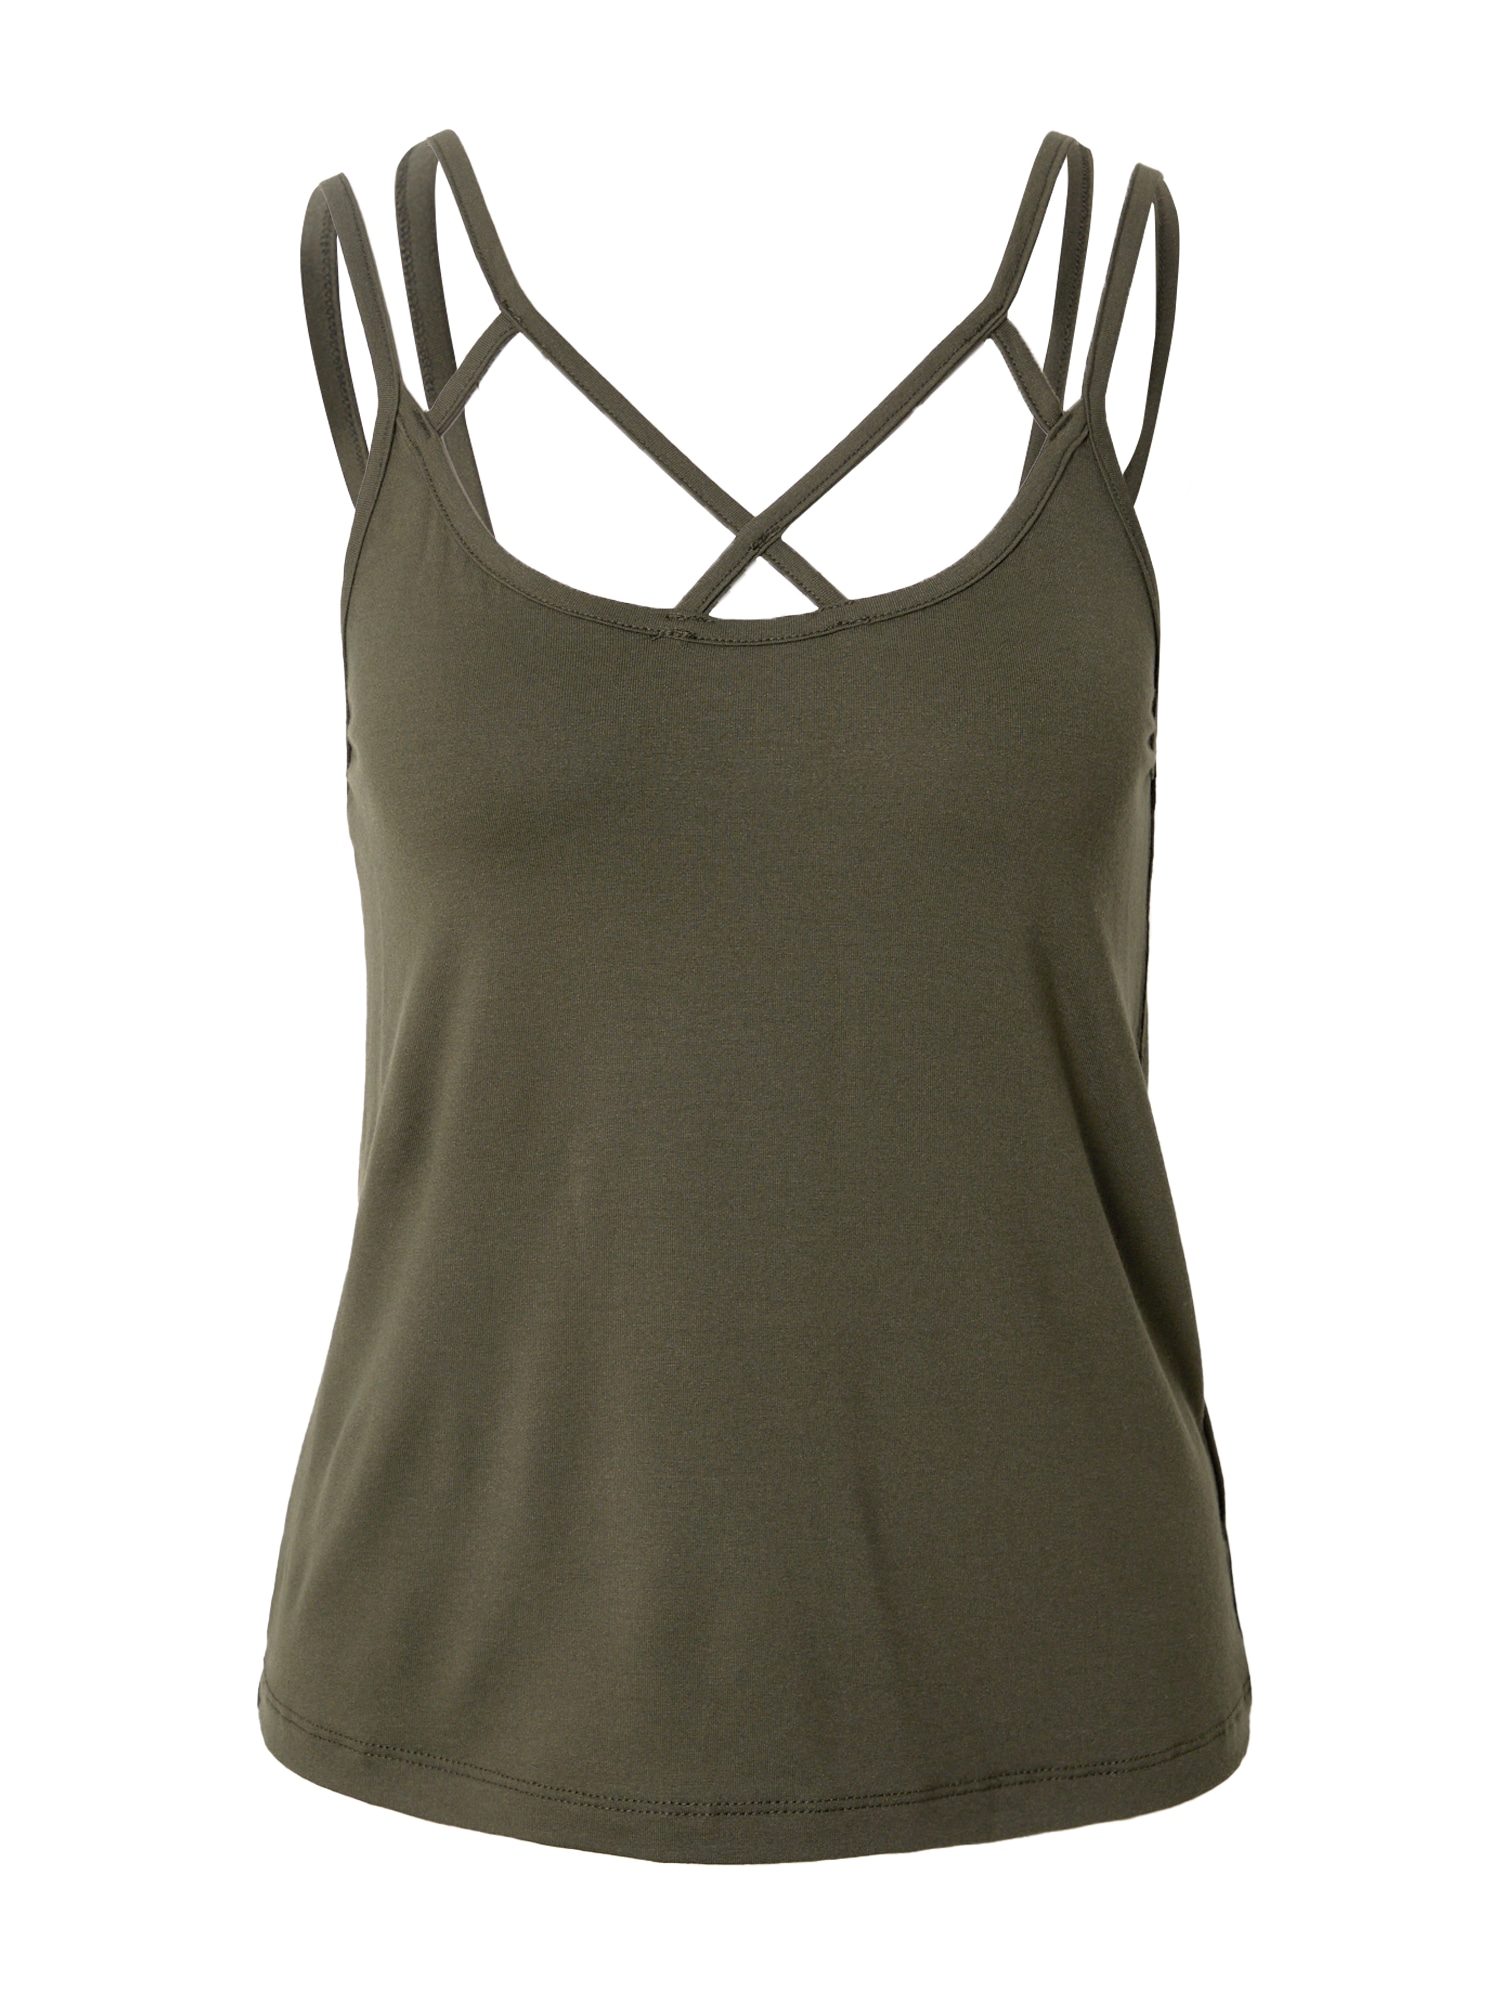 ABOUT YOU Top 'Duffy'  khaki